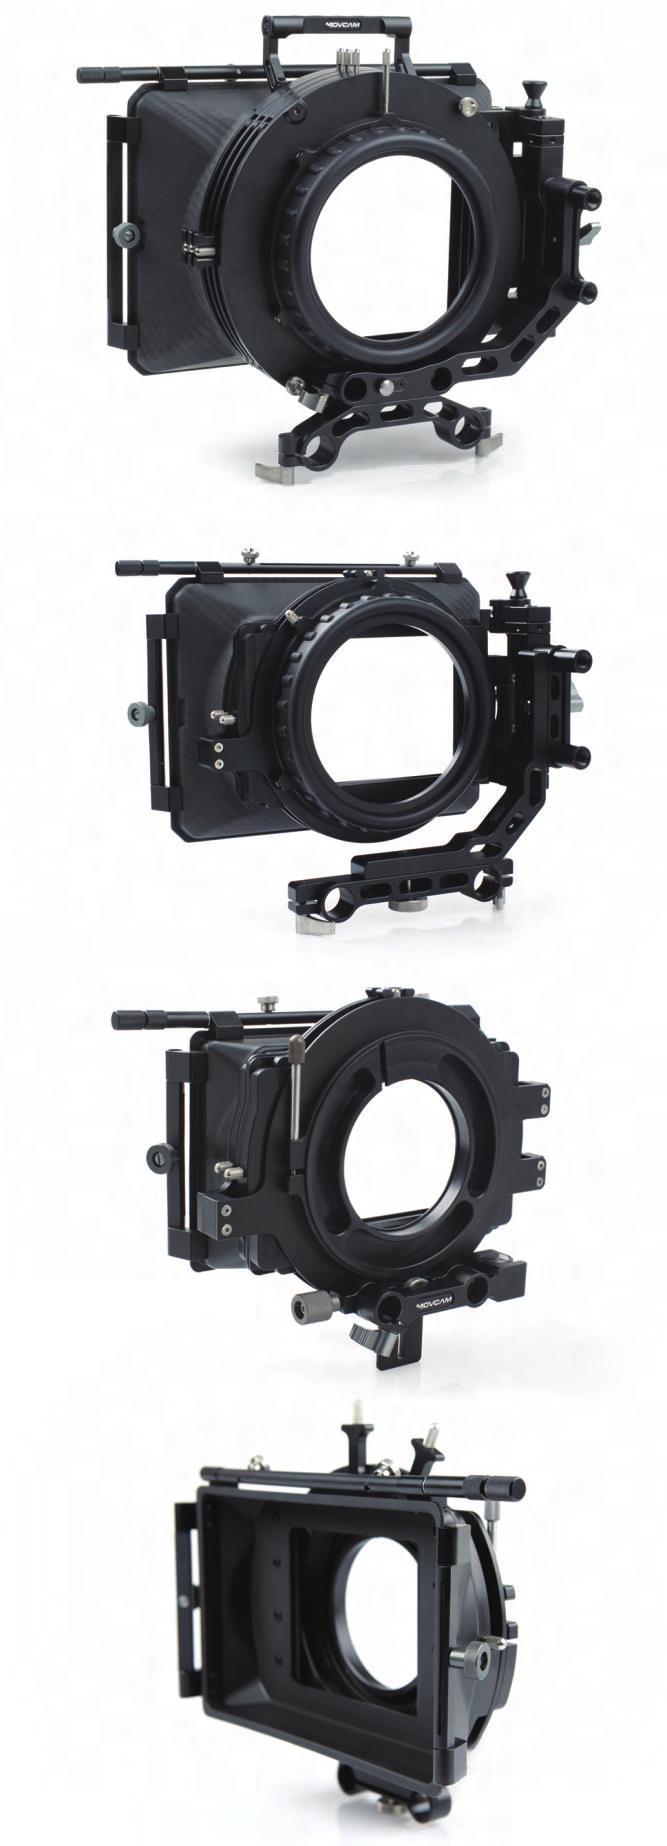 65, 4x4 LWS system 15mm 19mm Material CF+ Aluminum Alloy Adapter Ring 110mm 80mm Side bracket height adjustable Yes Swing-away Yes MM-1 MatteBox #301-0201 Connecting diameter 144mm Filter stage 2